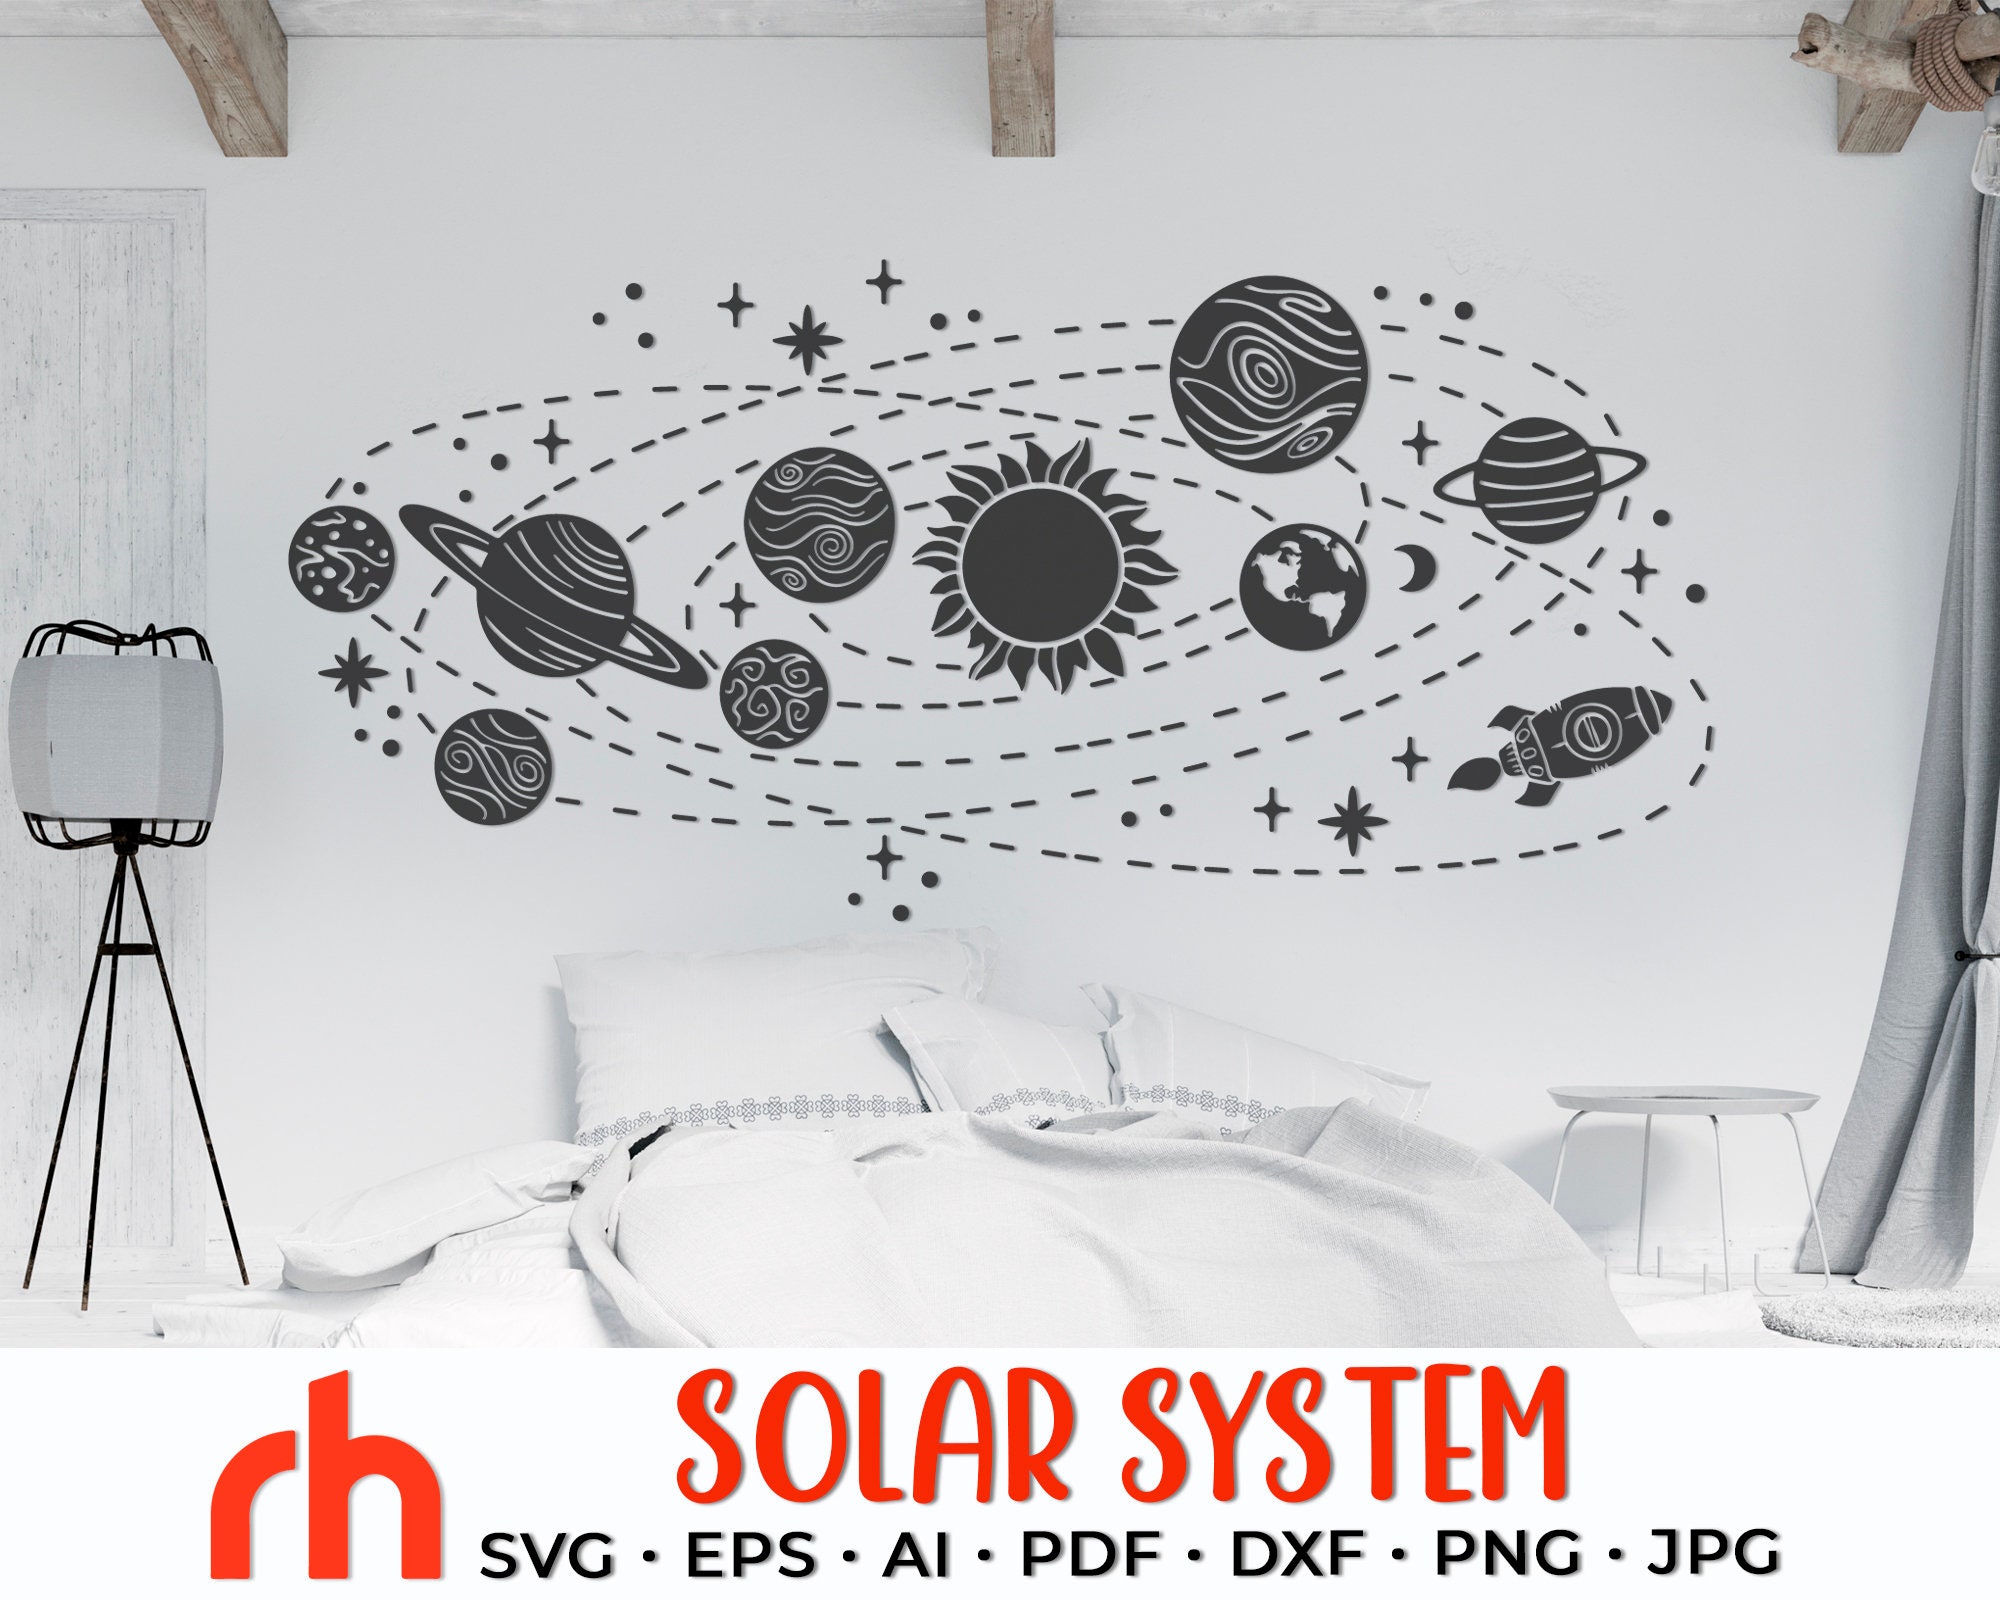 Foam Hanging Solar System Science Kit, For Education at Rs 180 in Bengaluru